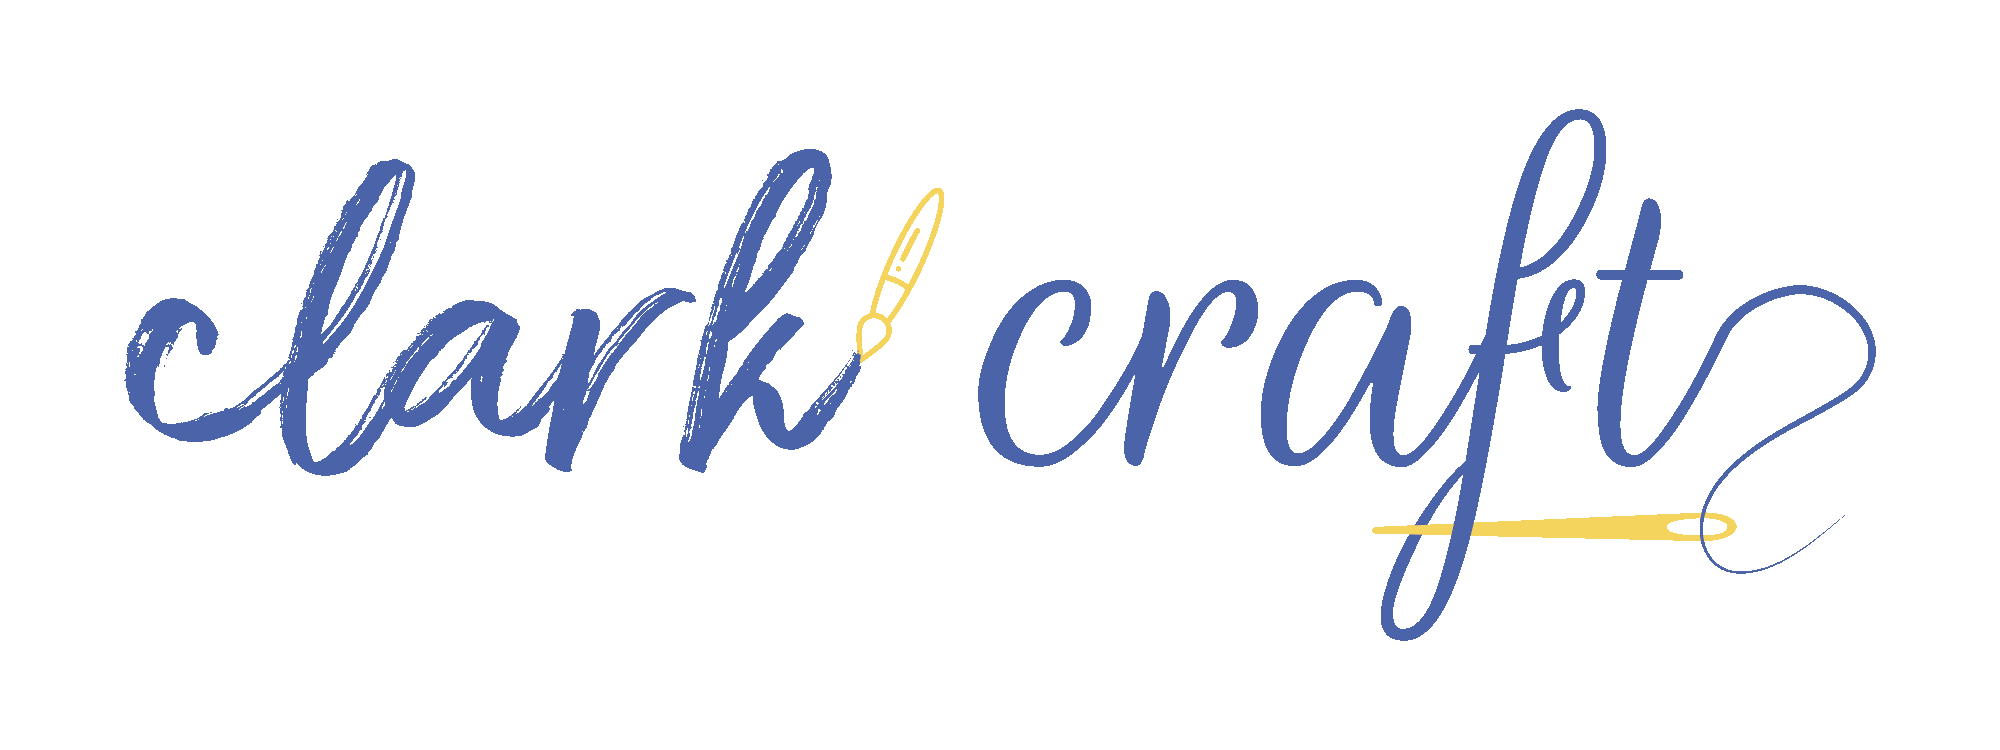 Clark Craft Products